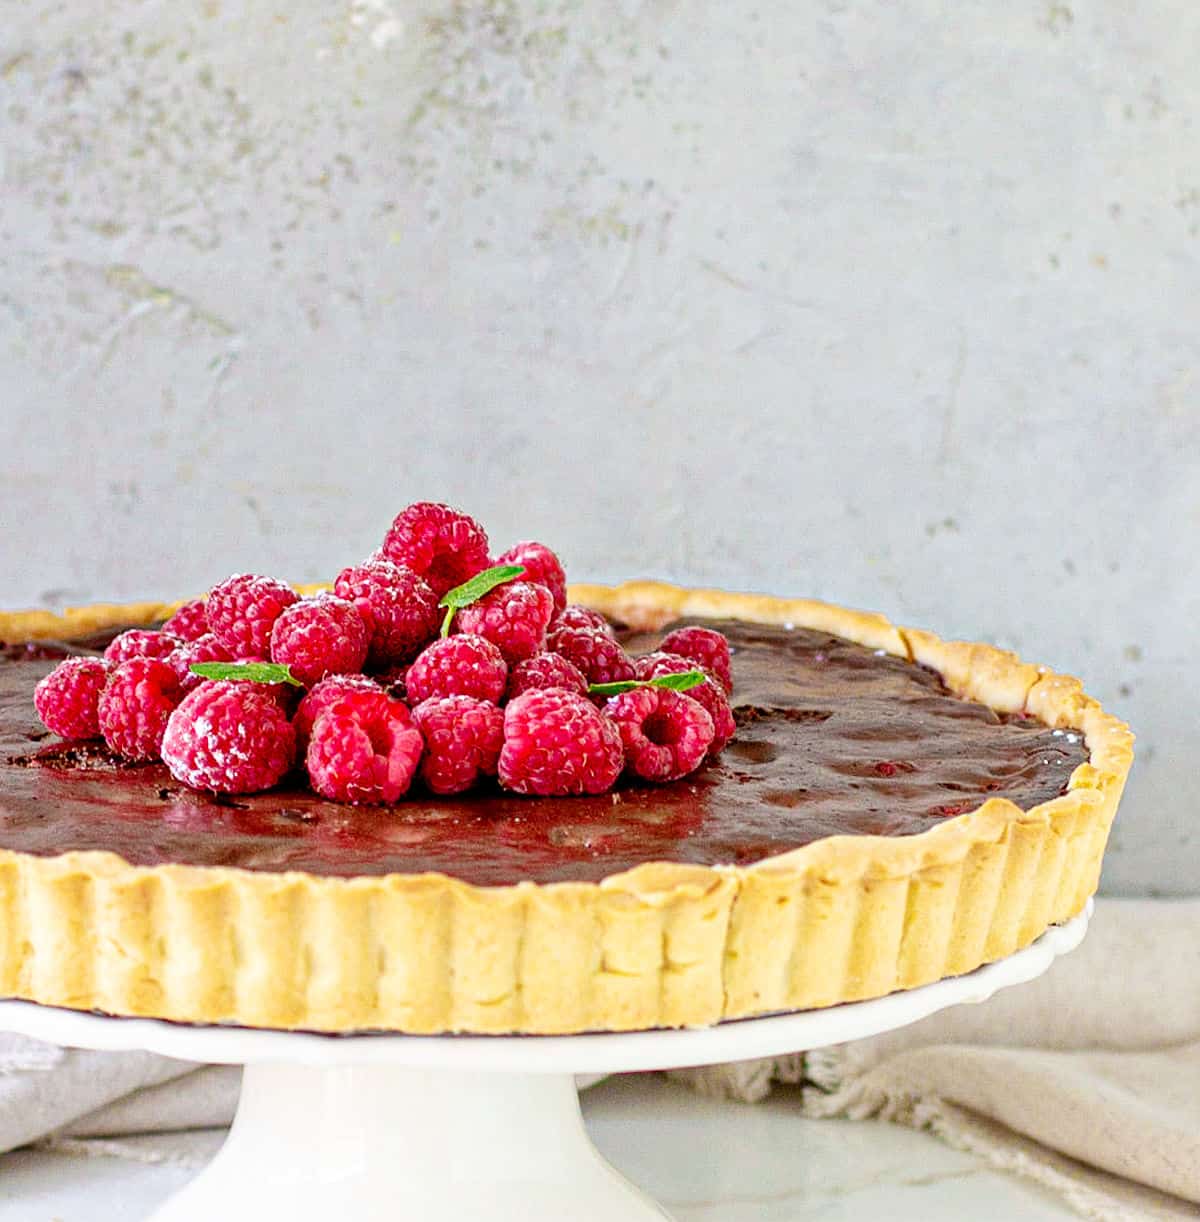 Partial image of chocolate tart on white cake stand, whole raspberries on top